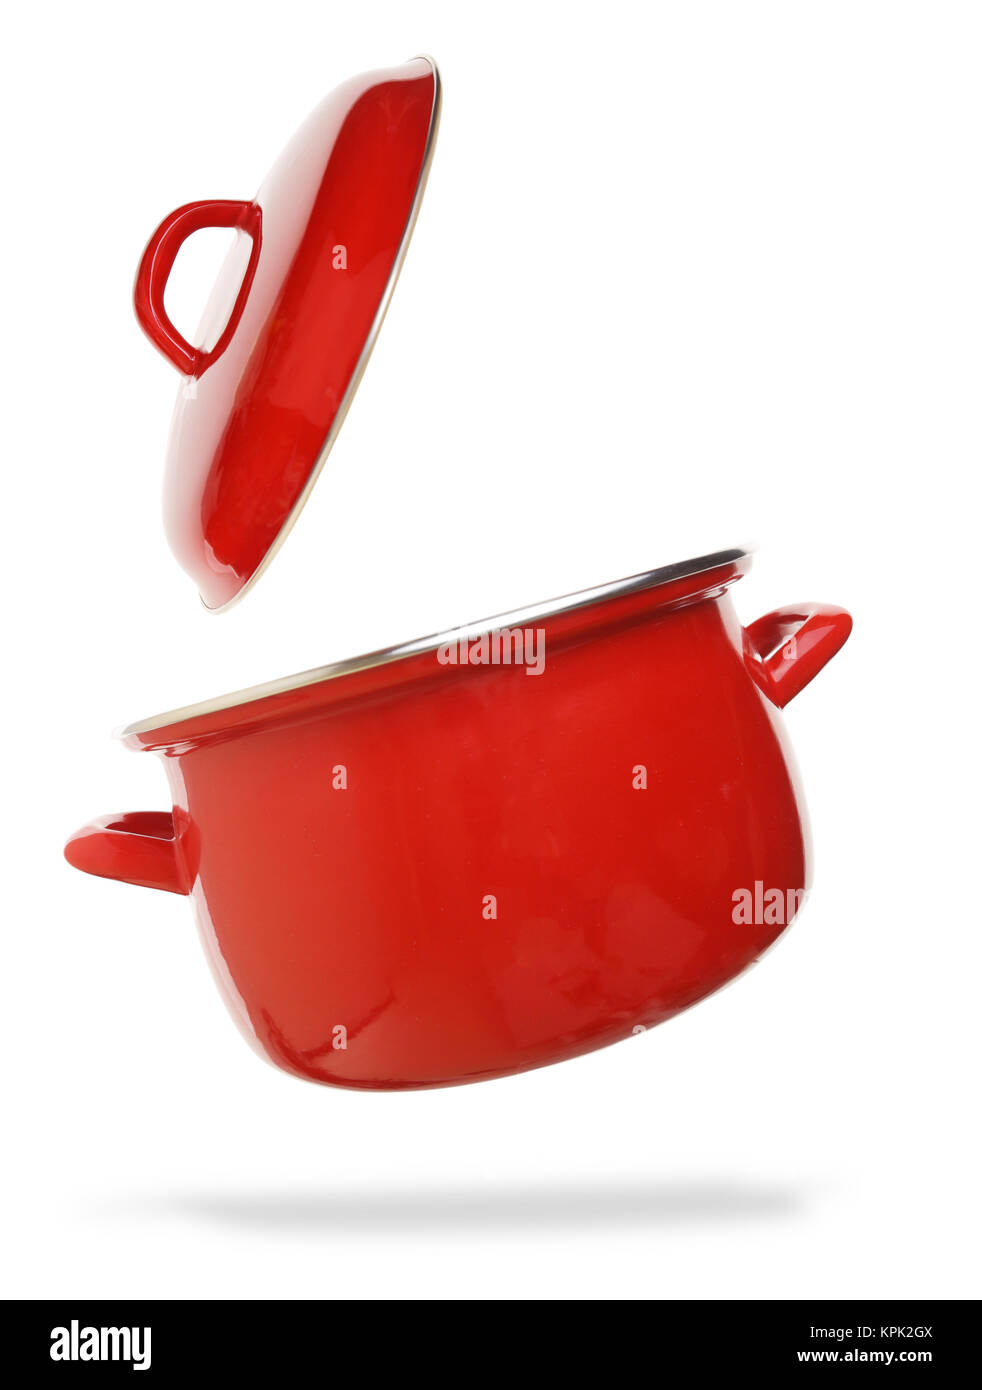 Red cooking pot isolated on white background Stock Photo